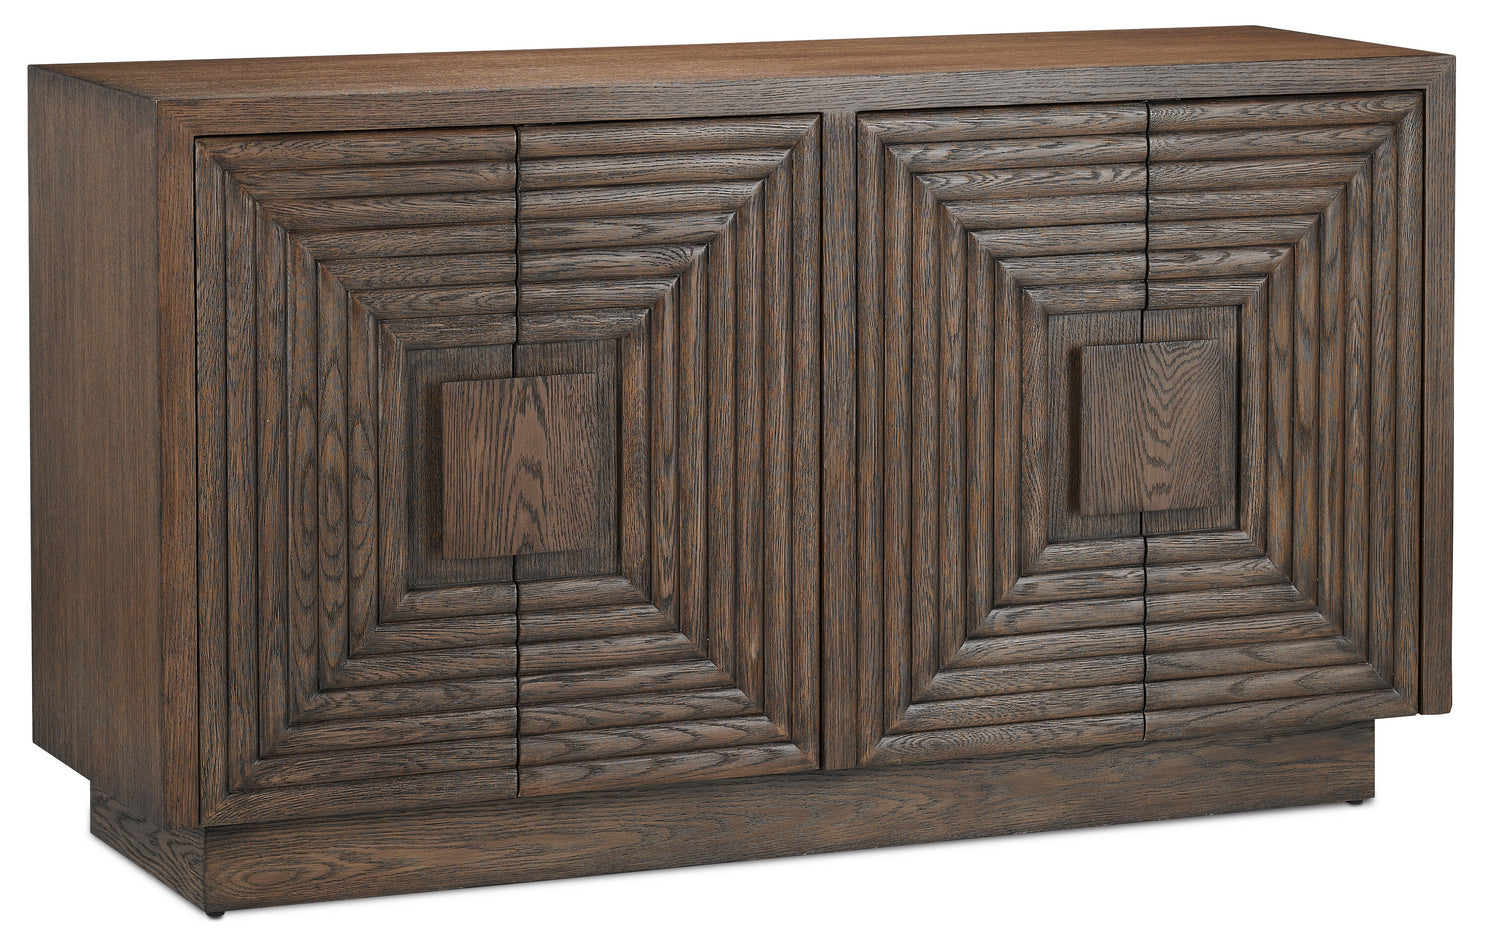 Cabinet from the Morombe collection in Distressed Cocoa finish